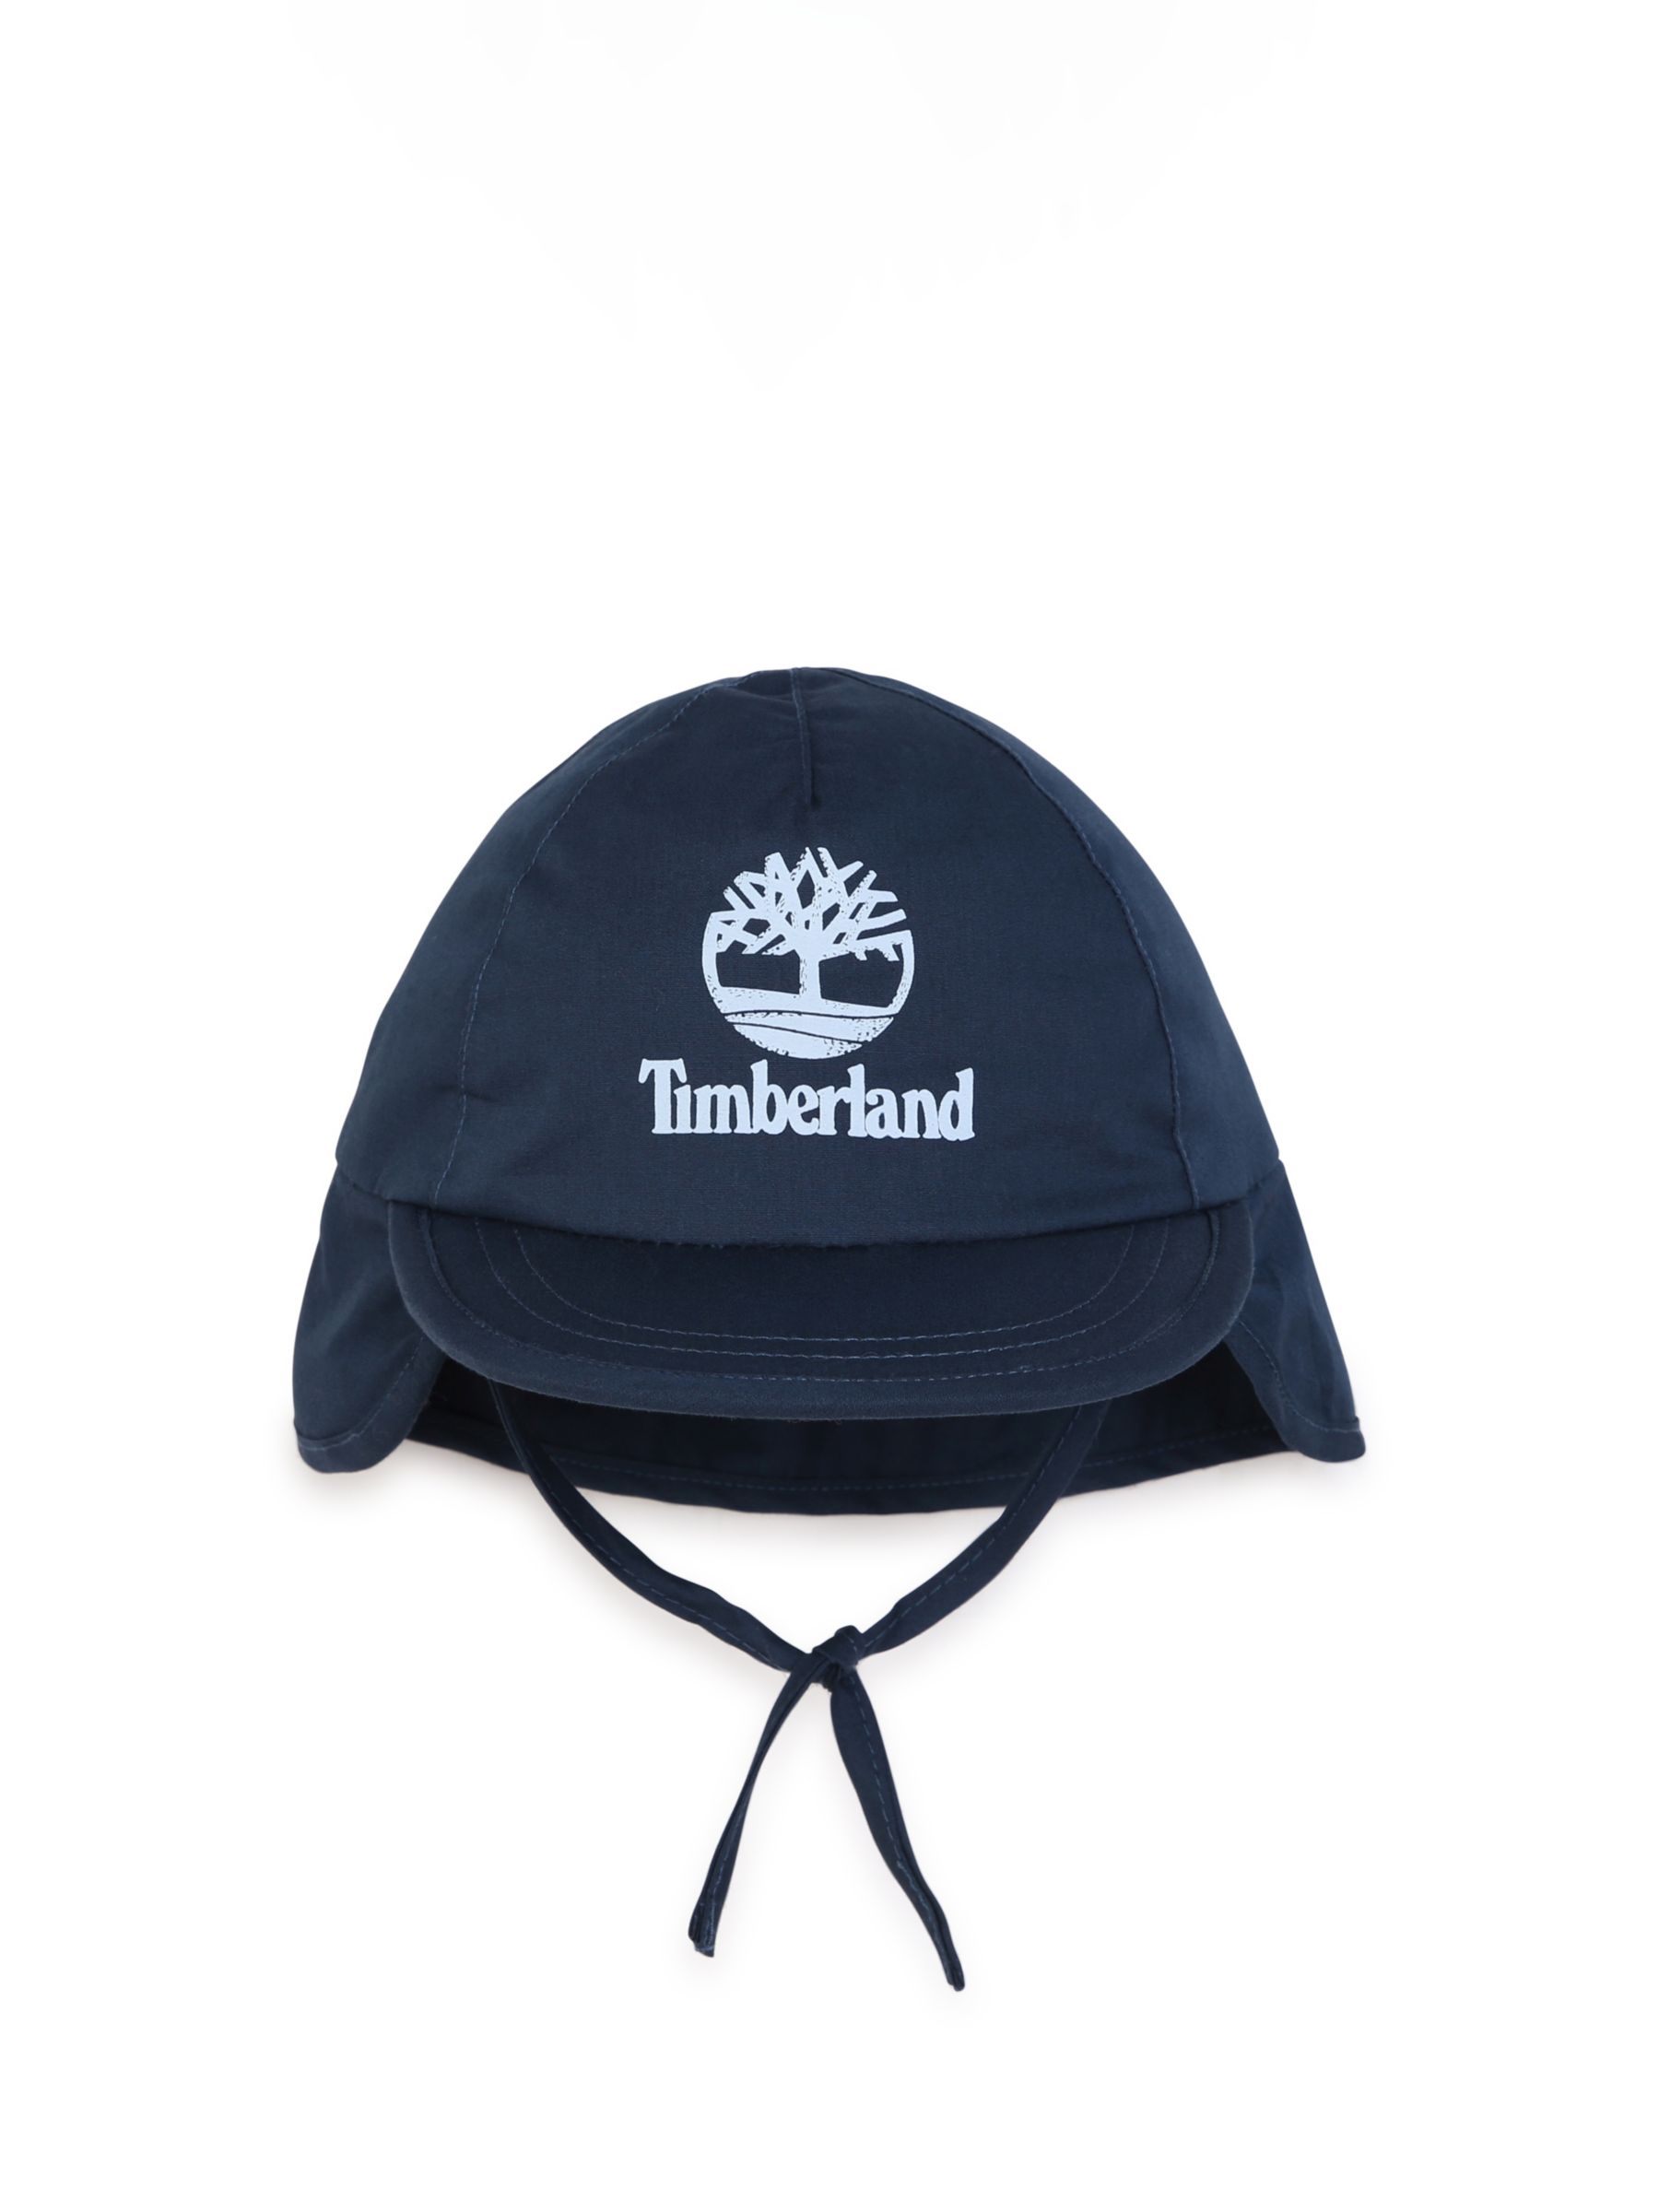 Timberland Baby Logo Neck Protection Cap, Navy/Multi, 3-6 months